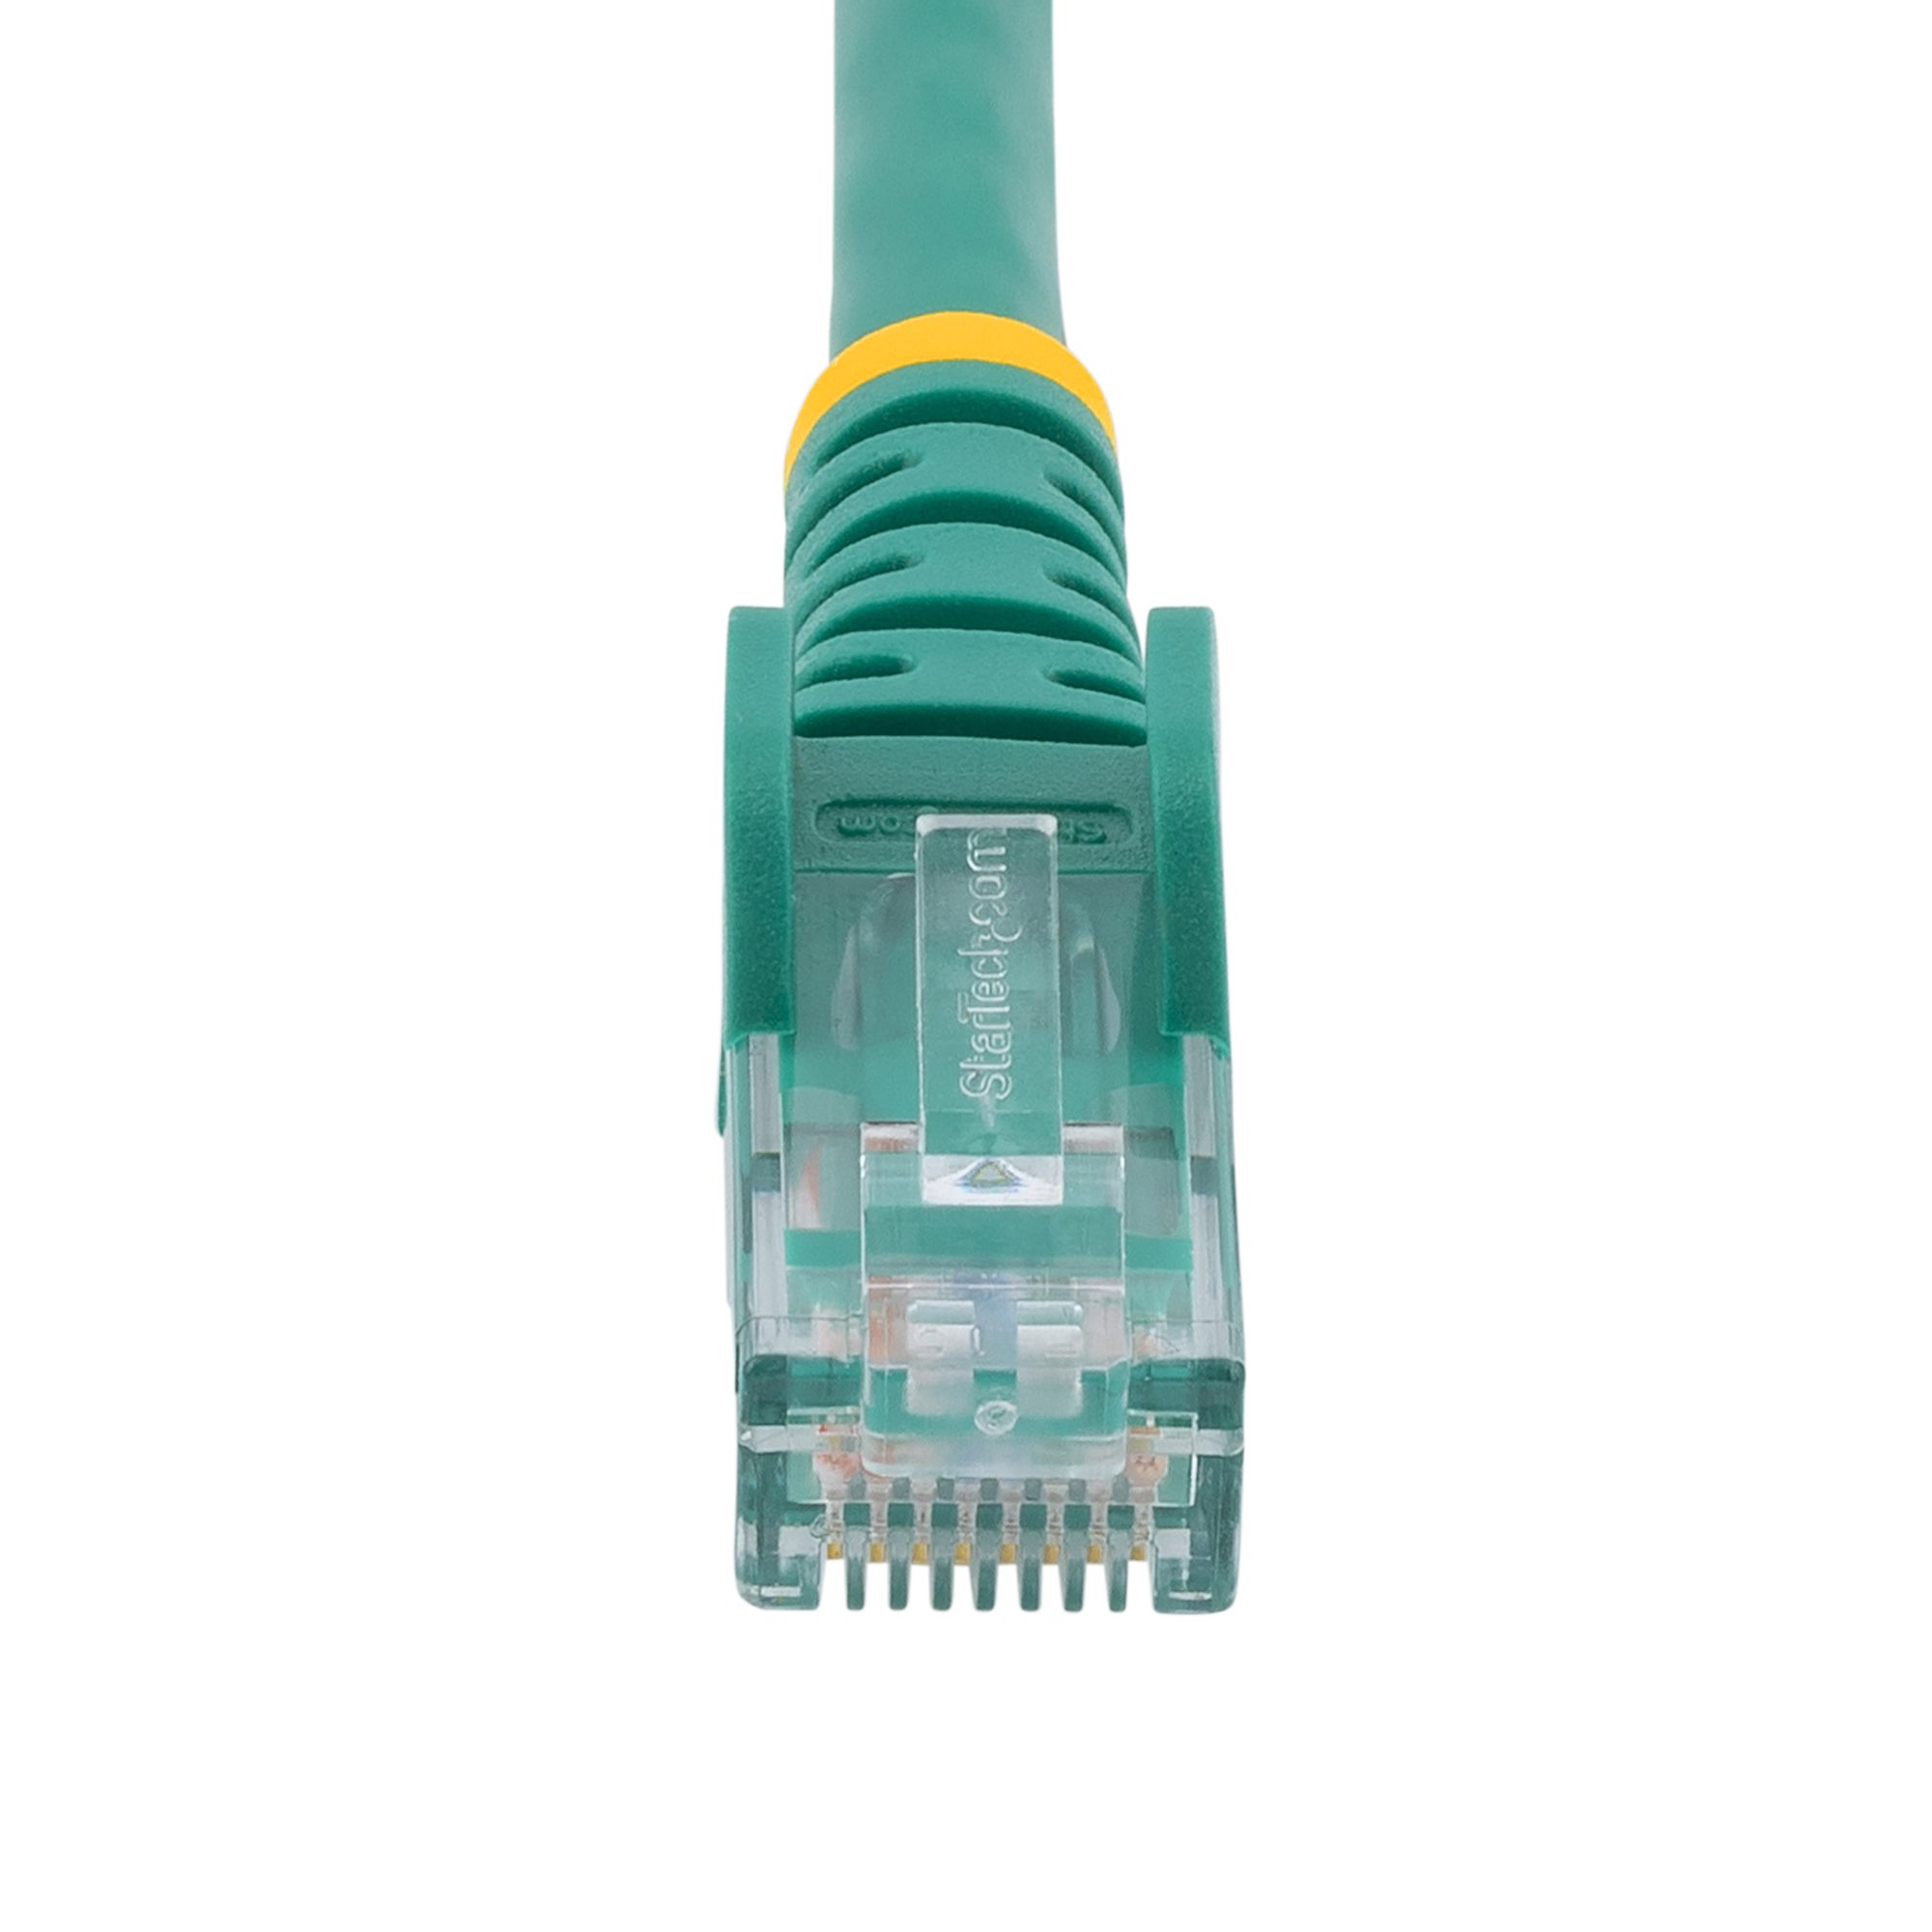 2m CAT6 Ethernet Cable - Green CAT 6 Gigabit Ethernet Wire -650MHz 100W PoE  RJ45 UTP Network/Patch Cord Snagless w/Strain Relief Fluke Tested/Wiring